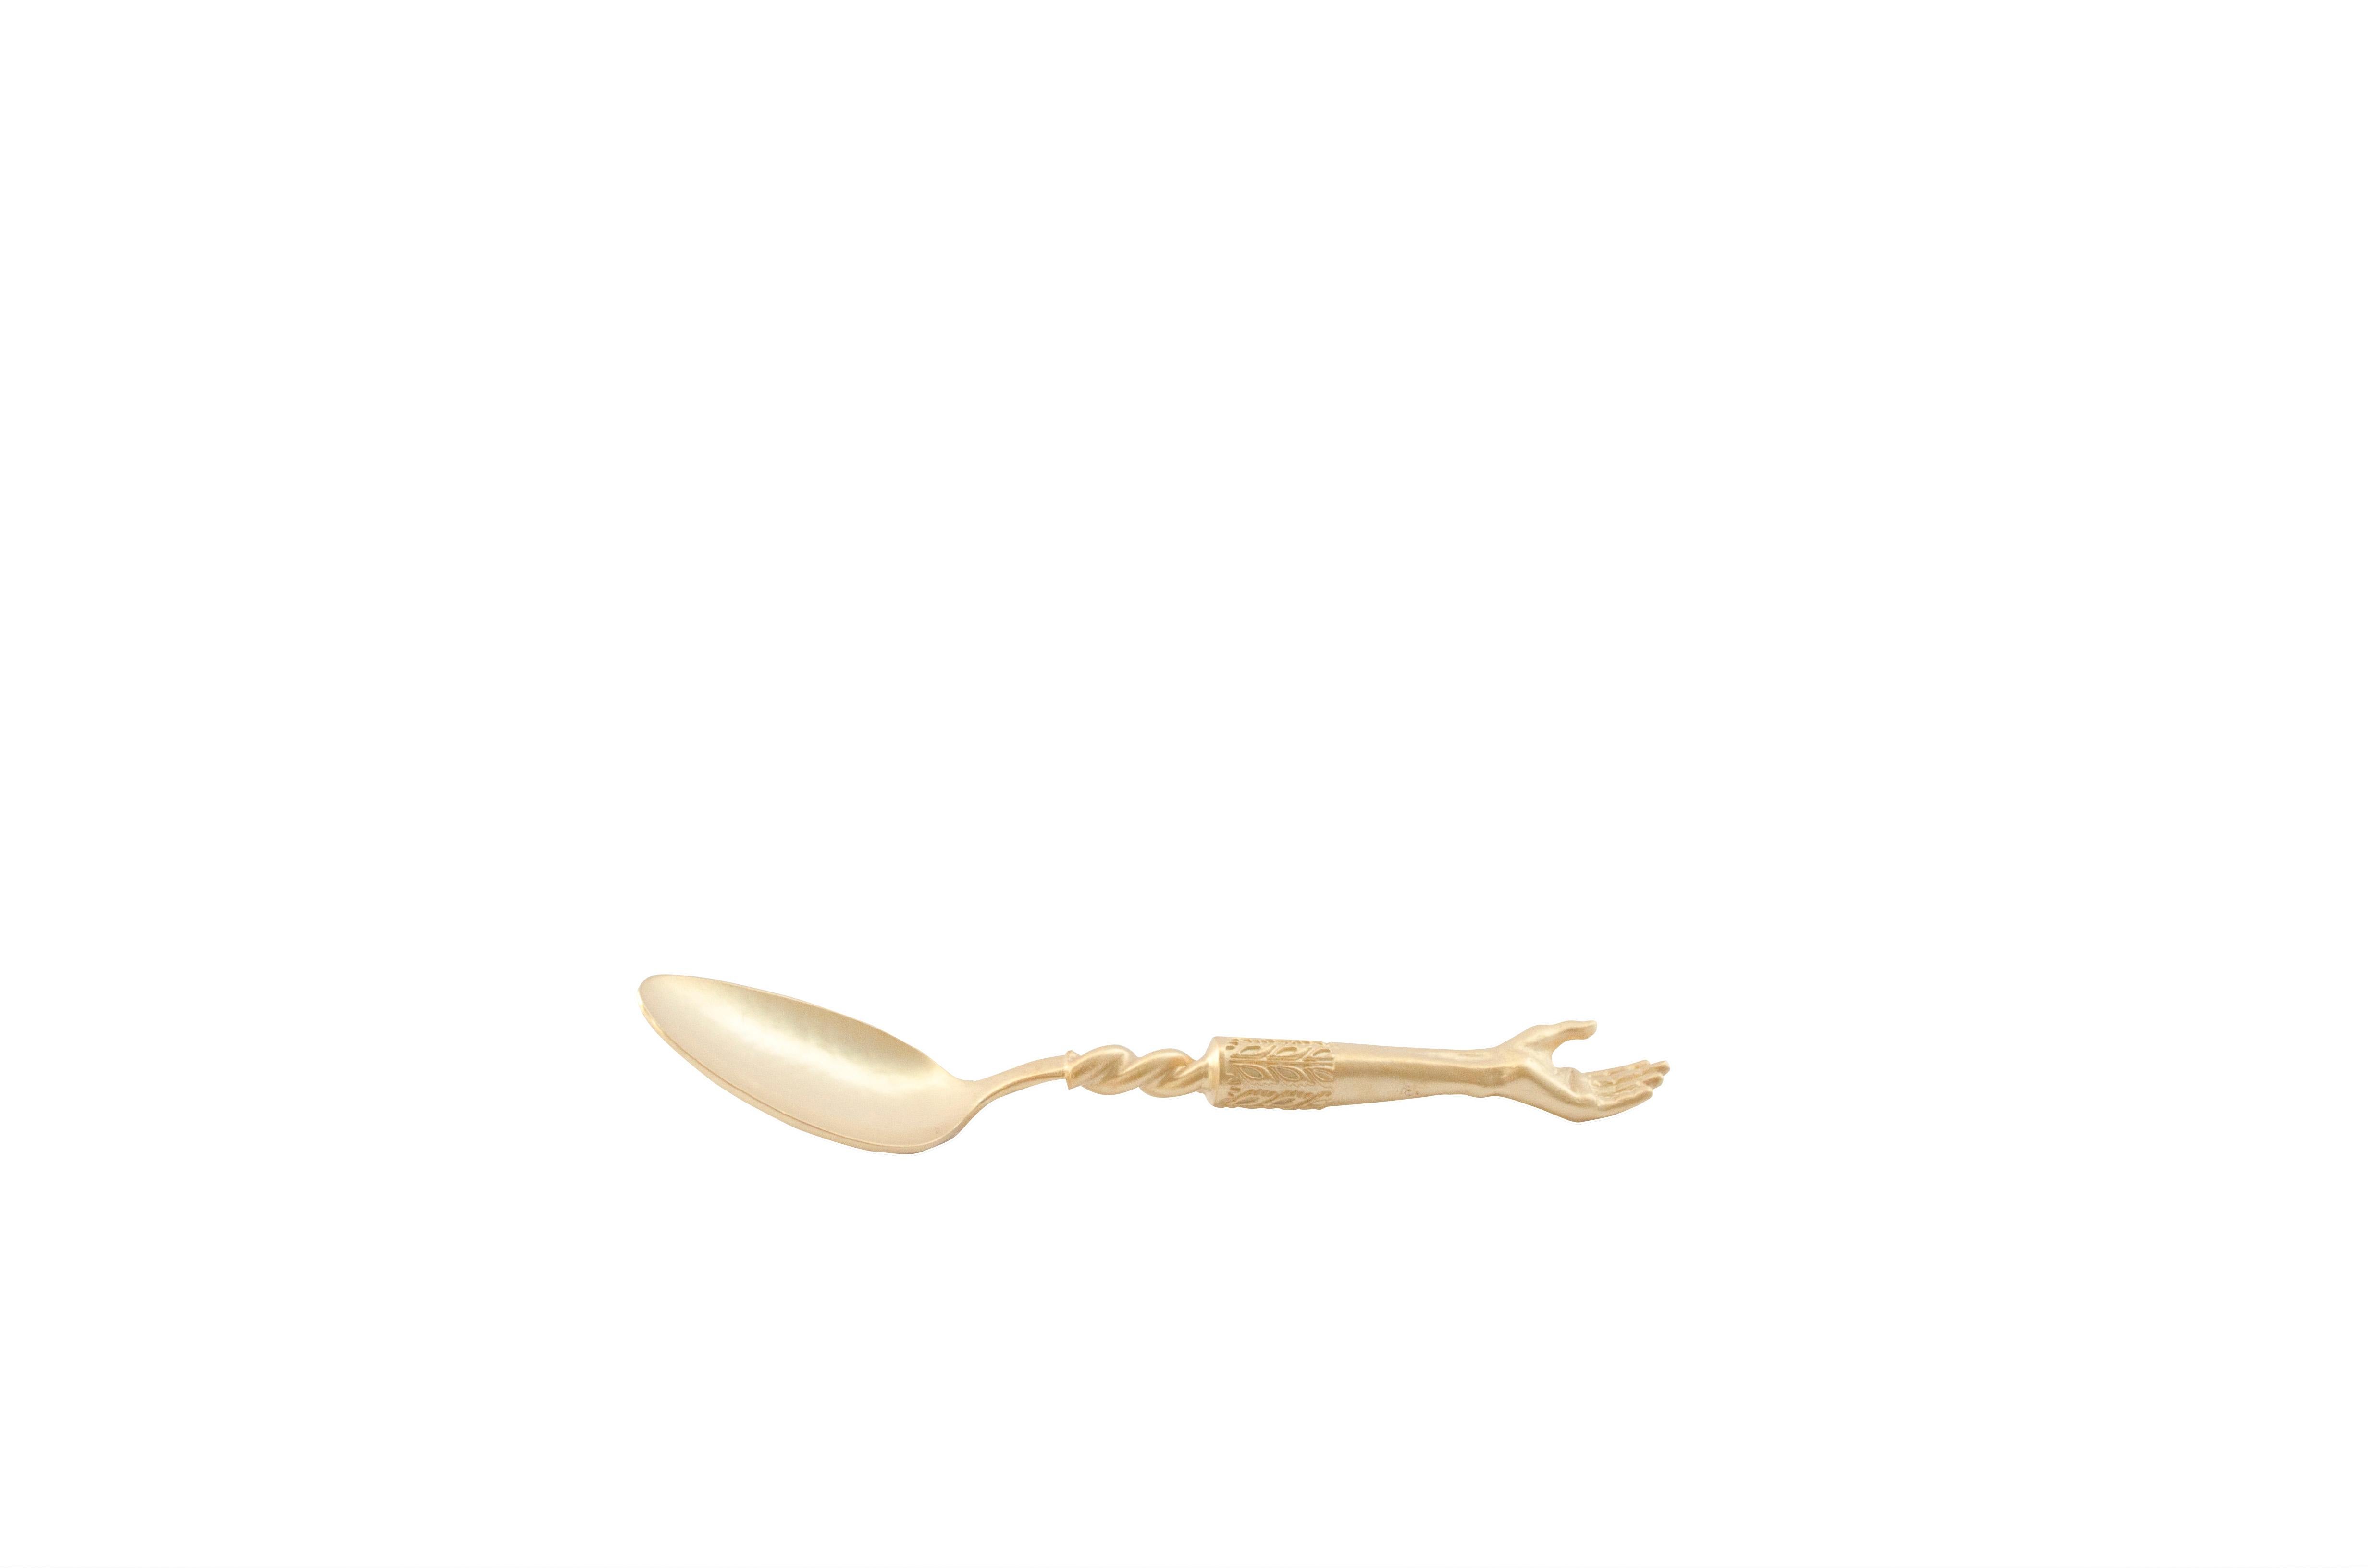 Carved Golden Plated Hand Tea Spoon Handcrafted Natalia Criado For Sale